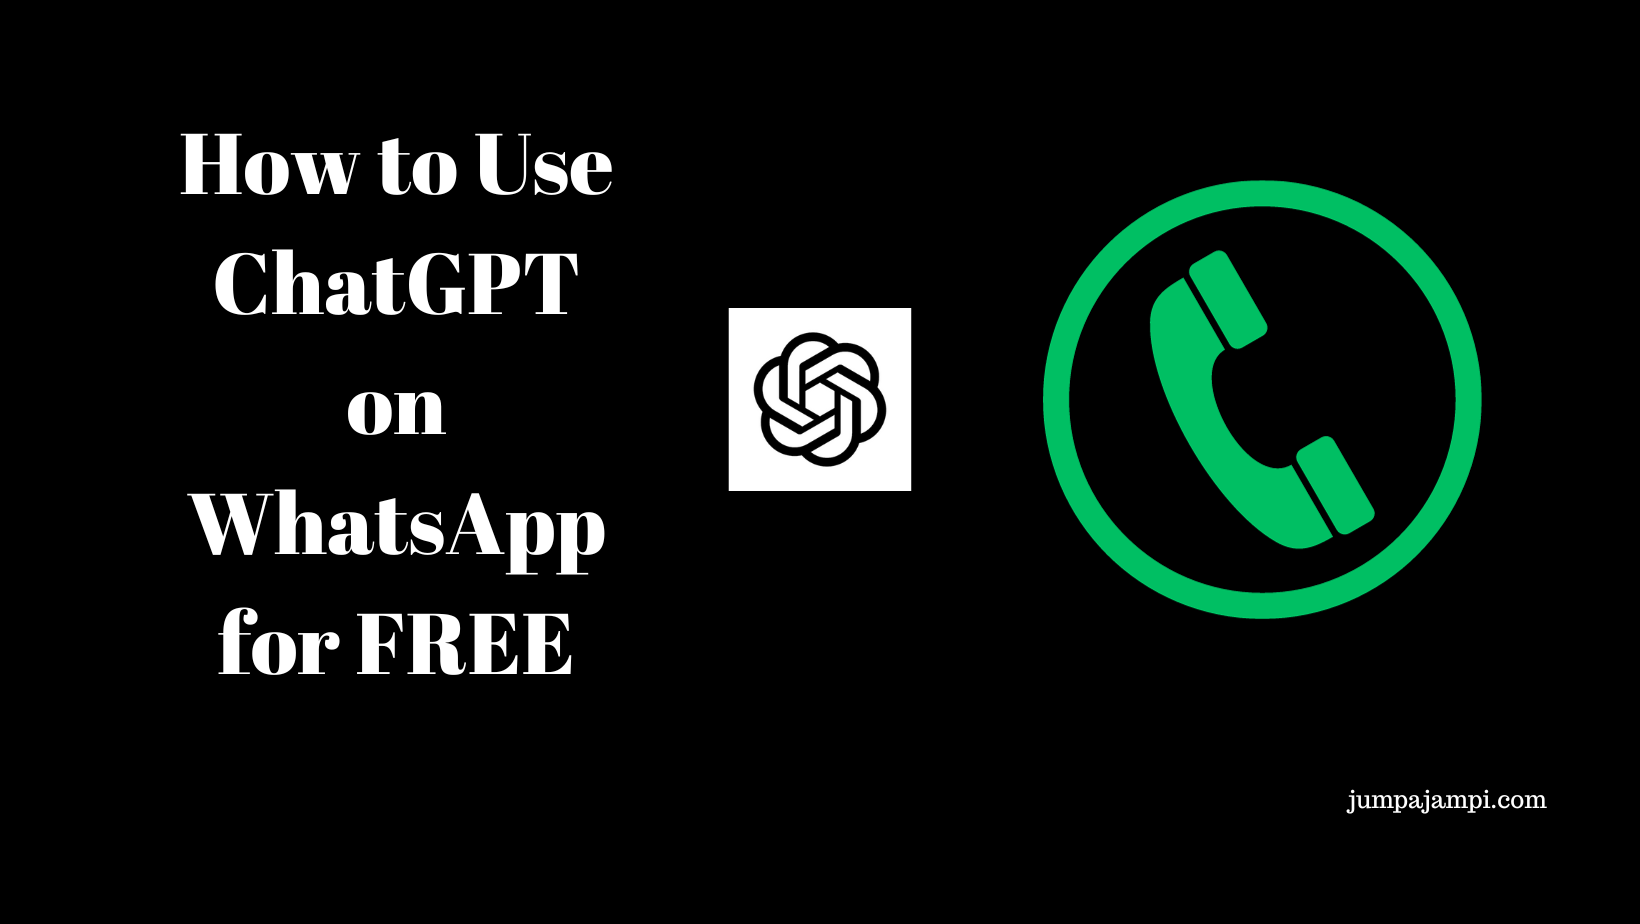 How to Use ChatGPT on WhatsApp for FREE